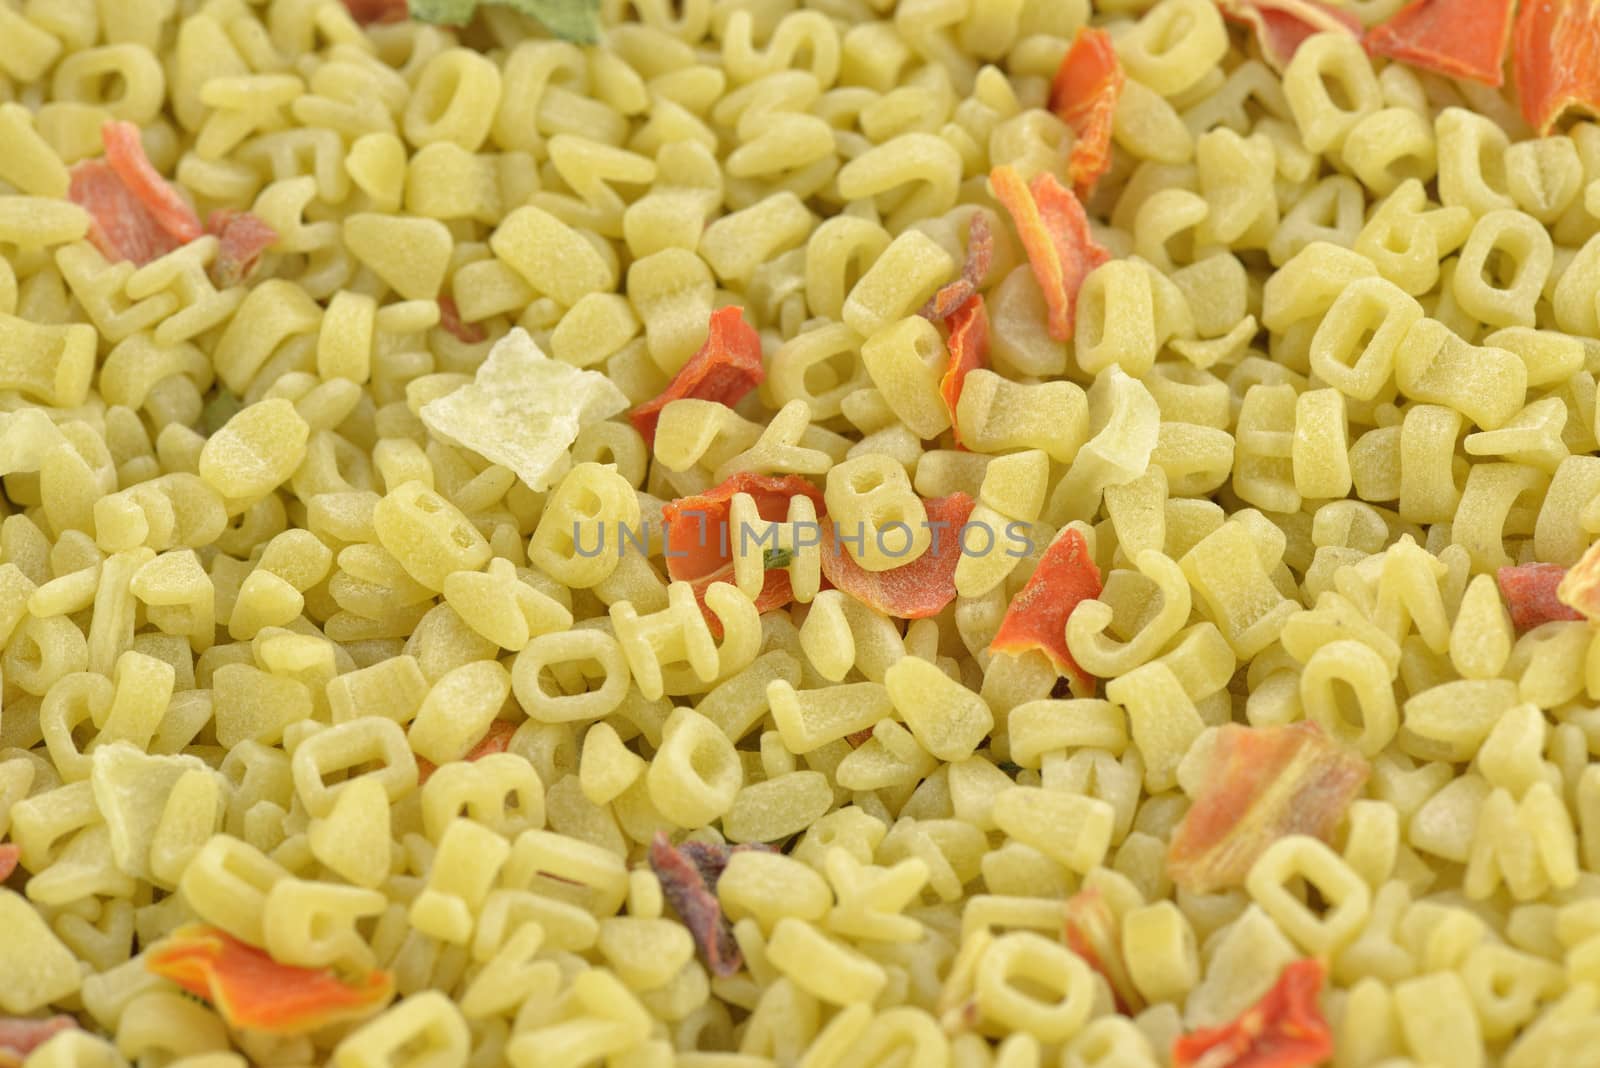 Alphabet pasta and dehydrated vegetable for soup